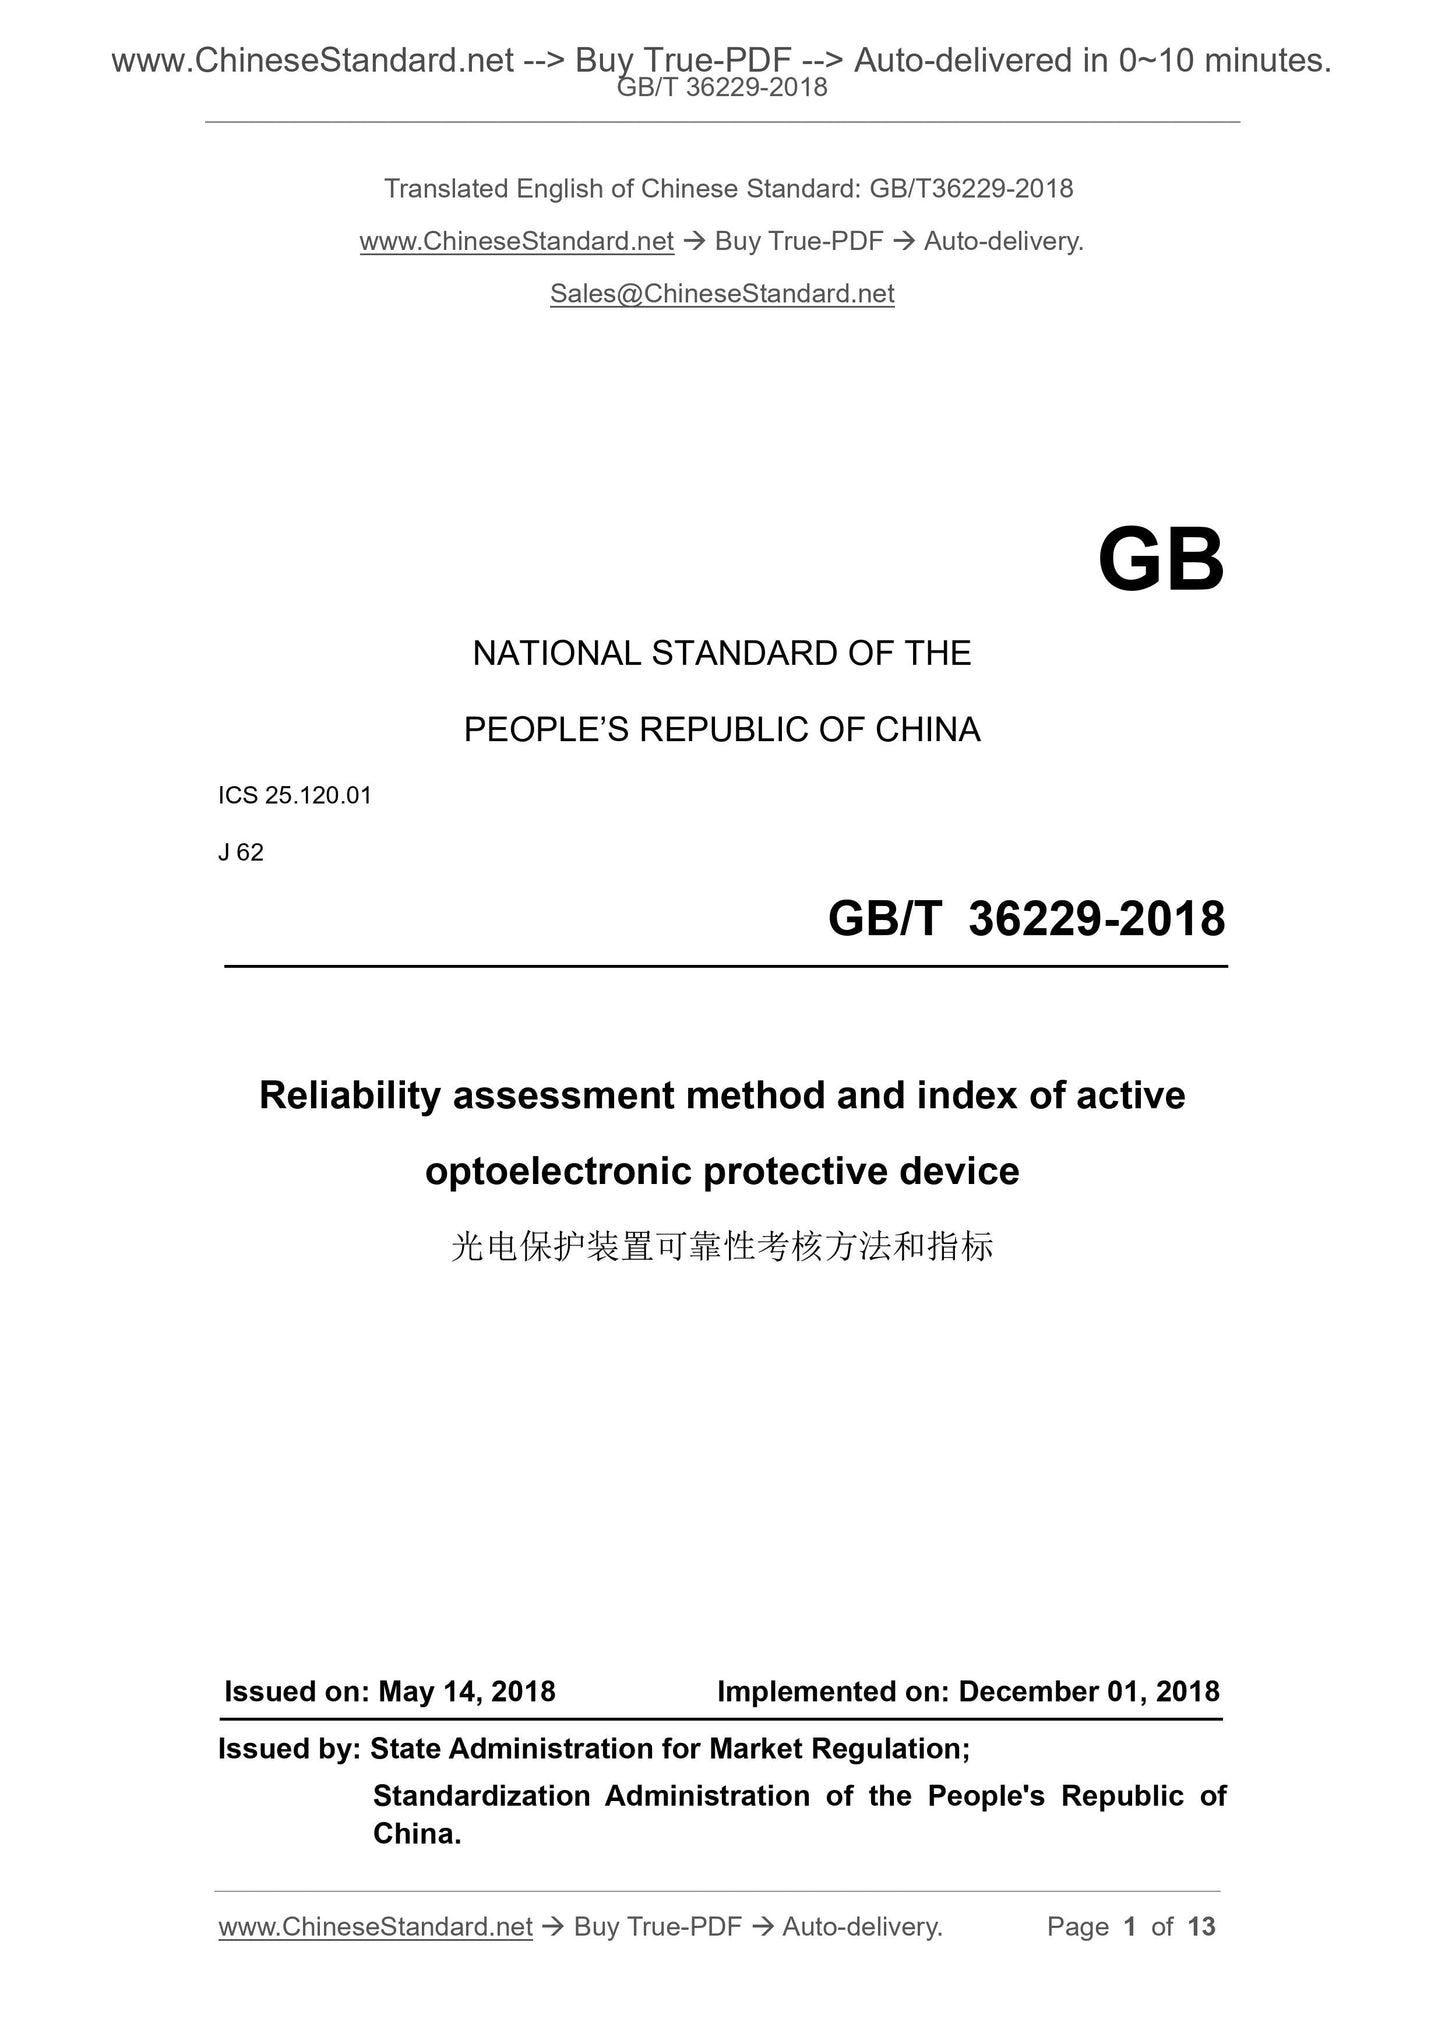 GB/T 36229-2018 Page 1